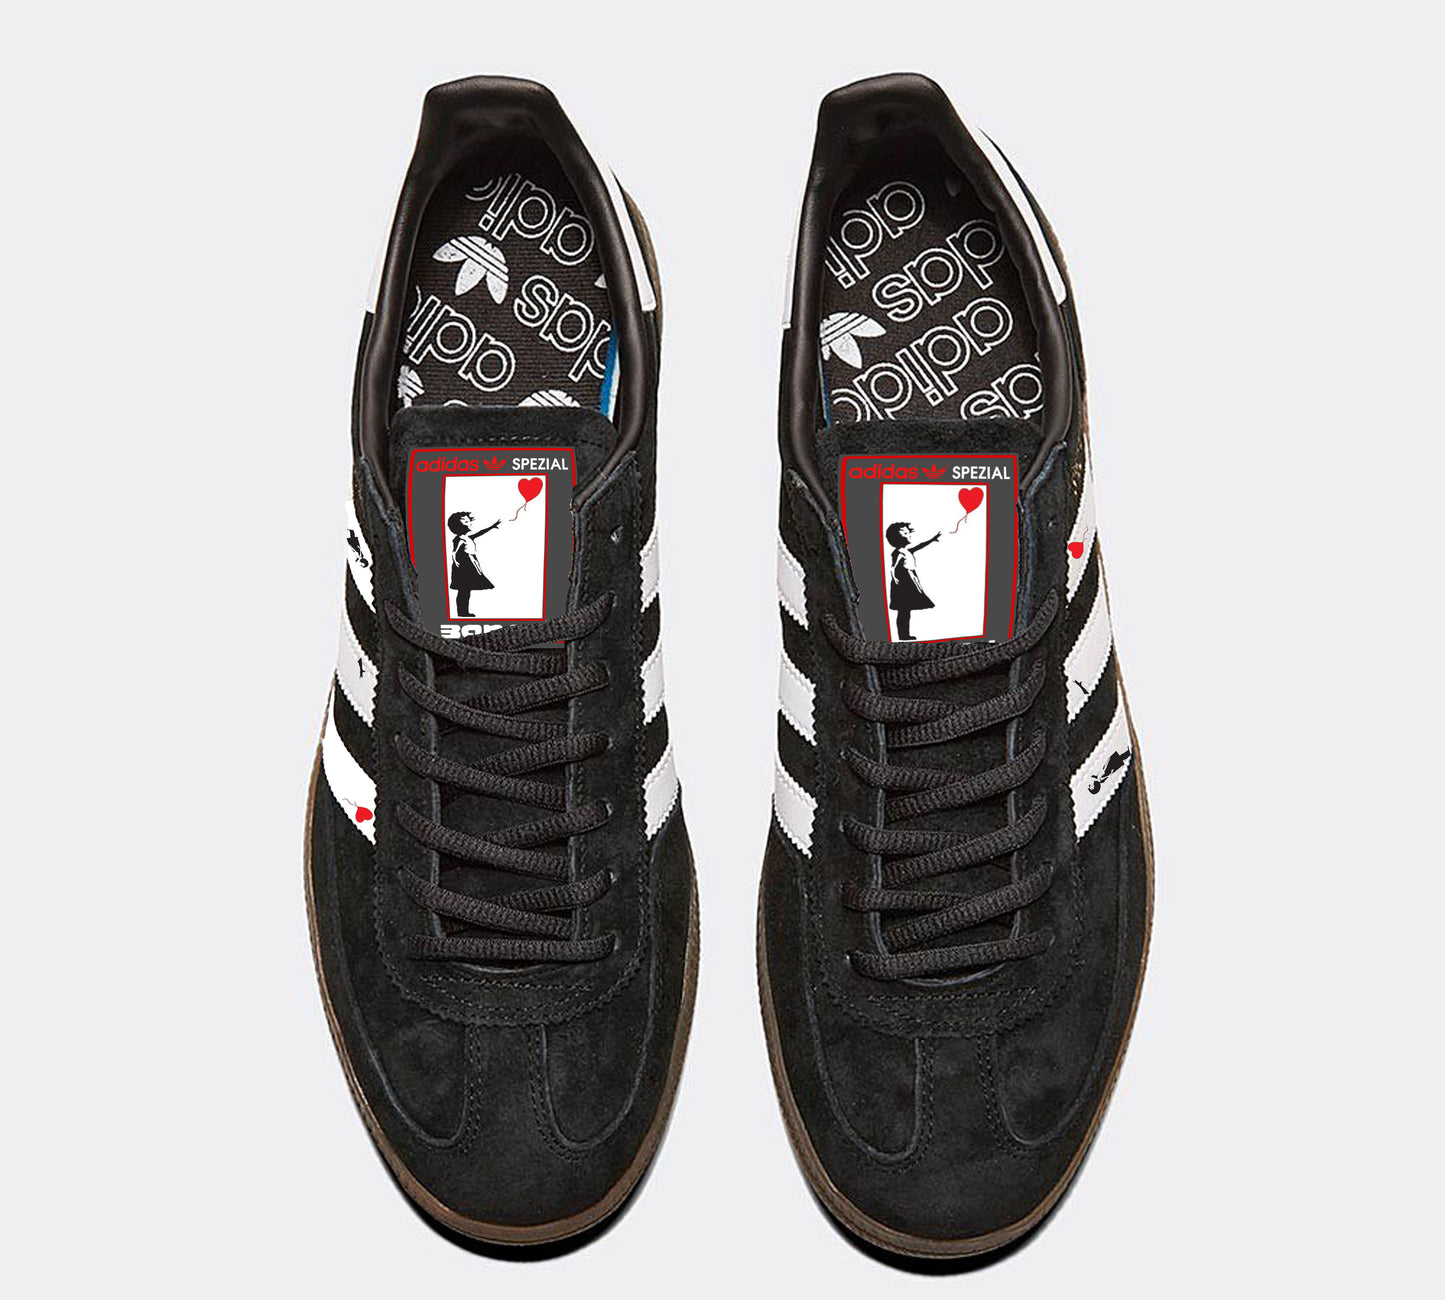 Limited edition Banksy Balloon Girl black/ white/ red Adidas custom Handball Spezial trainers / sneakers